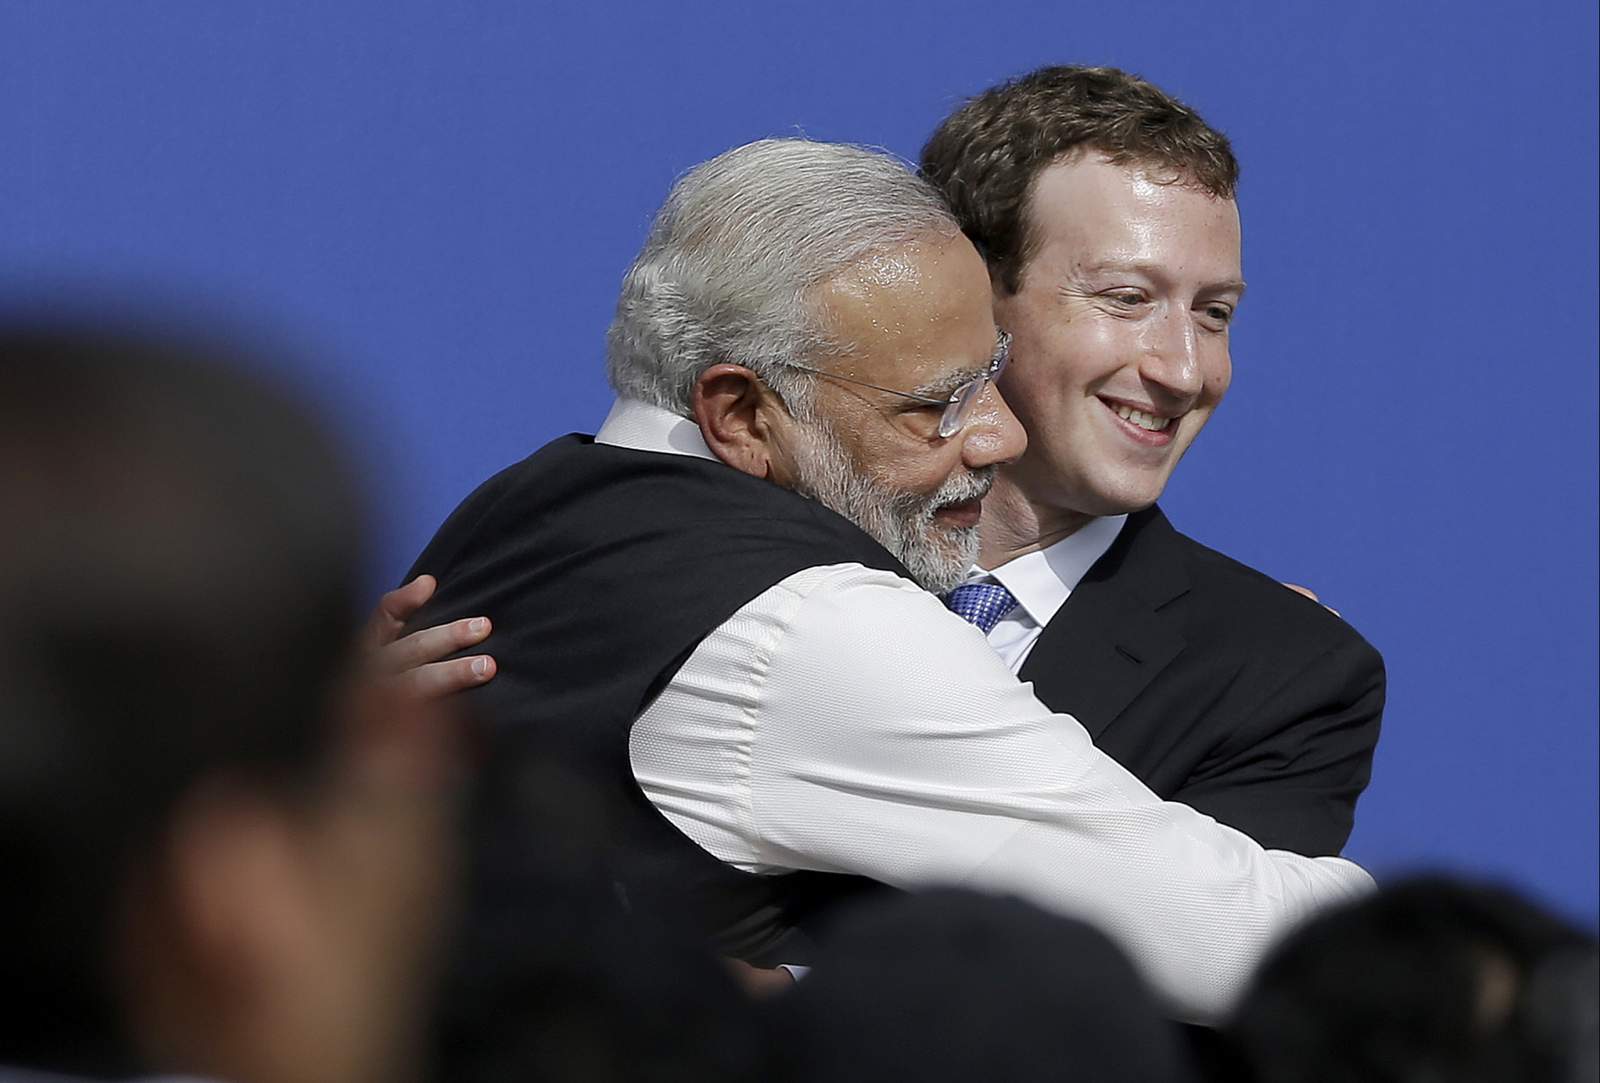 Facebook India grilled over hate speech, allegations of bias